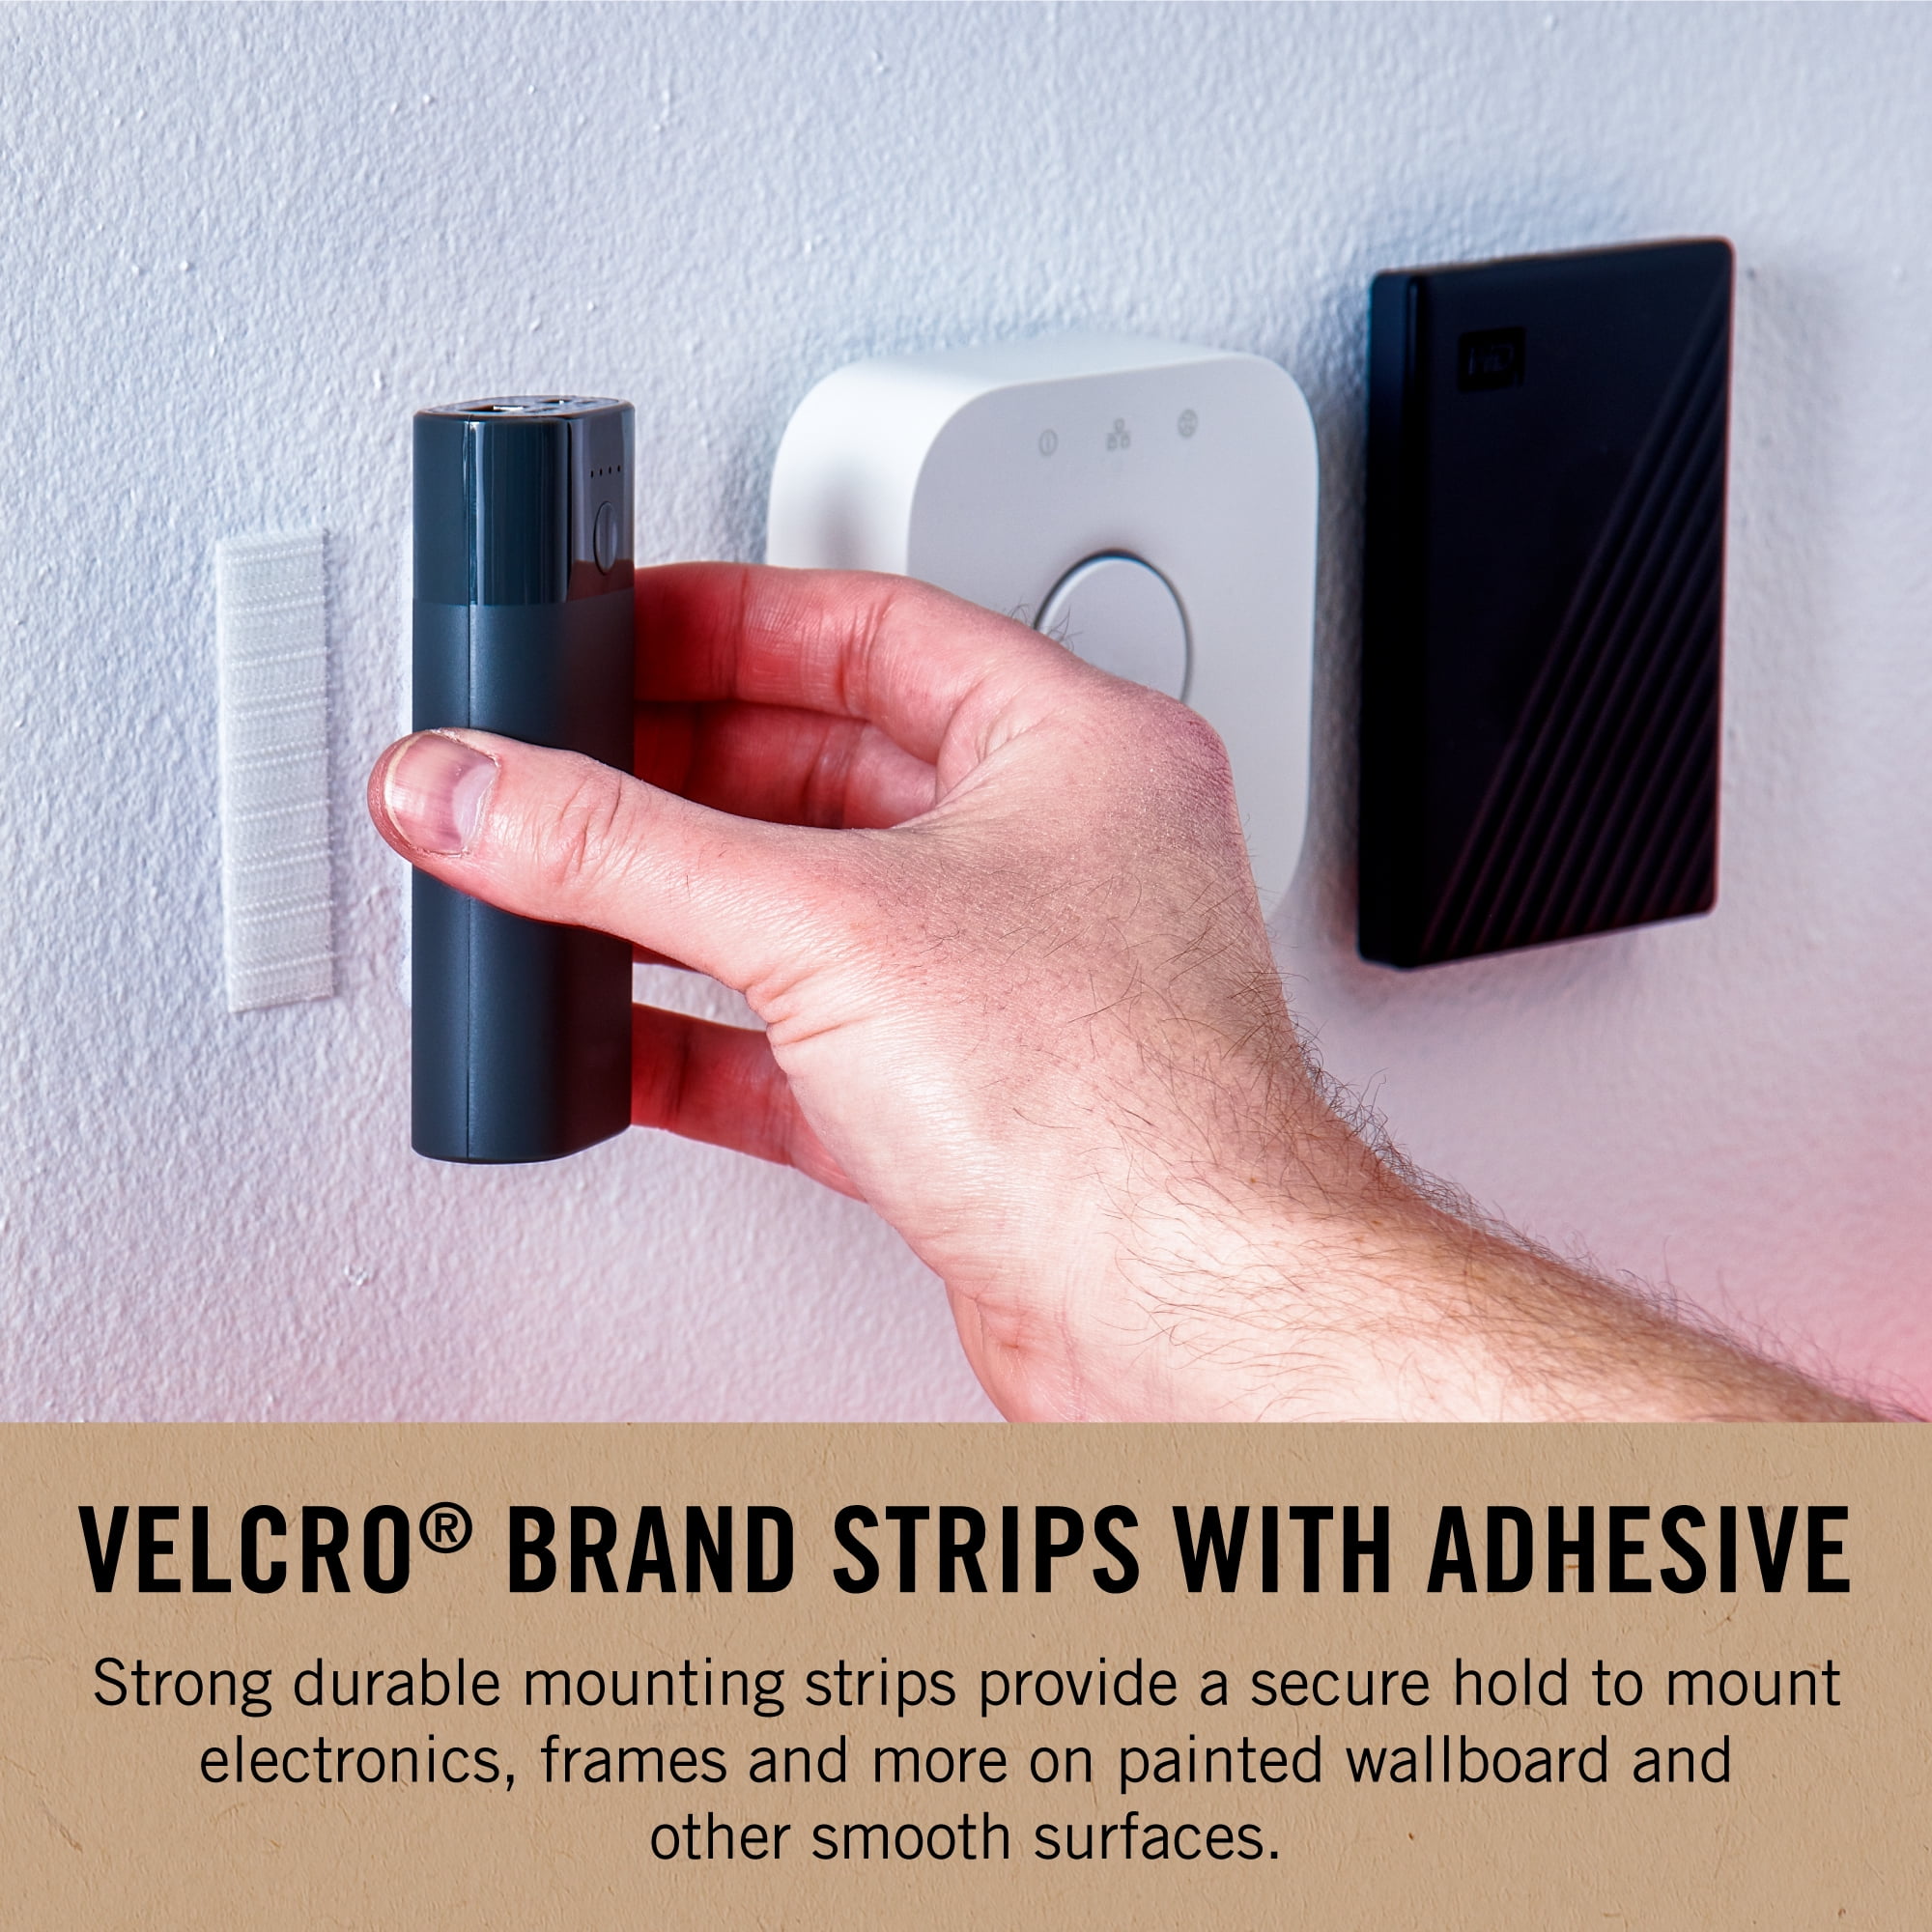 VELCRO Brand ECO Collection Industrial Strength Strips 3in x 1 3/4in,  Sustainable 40% Recycled Materials, 2ct Black